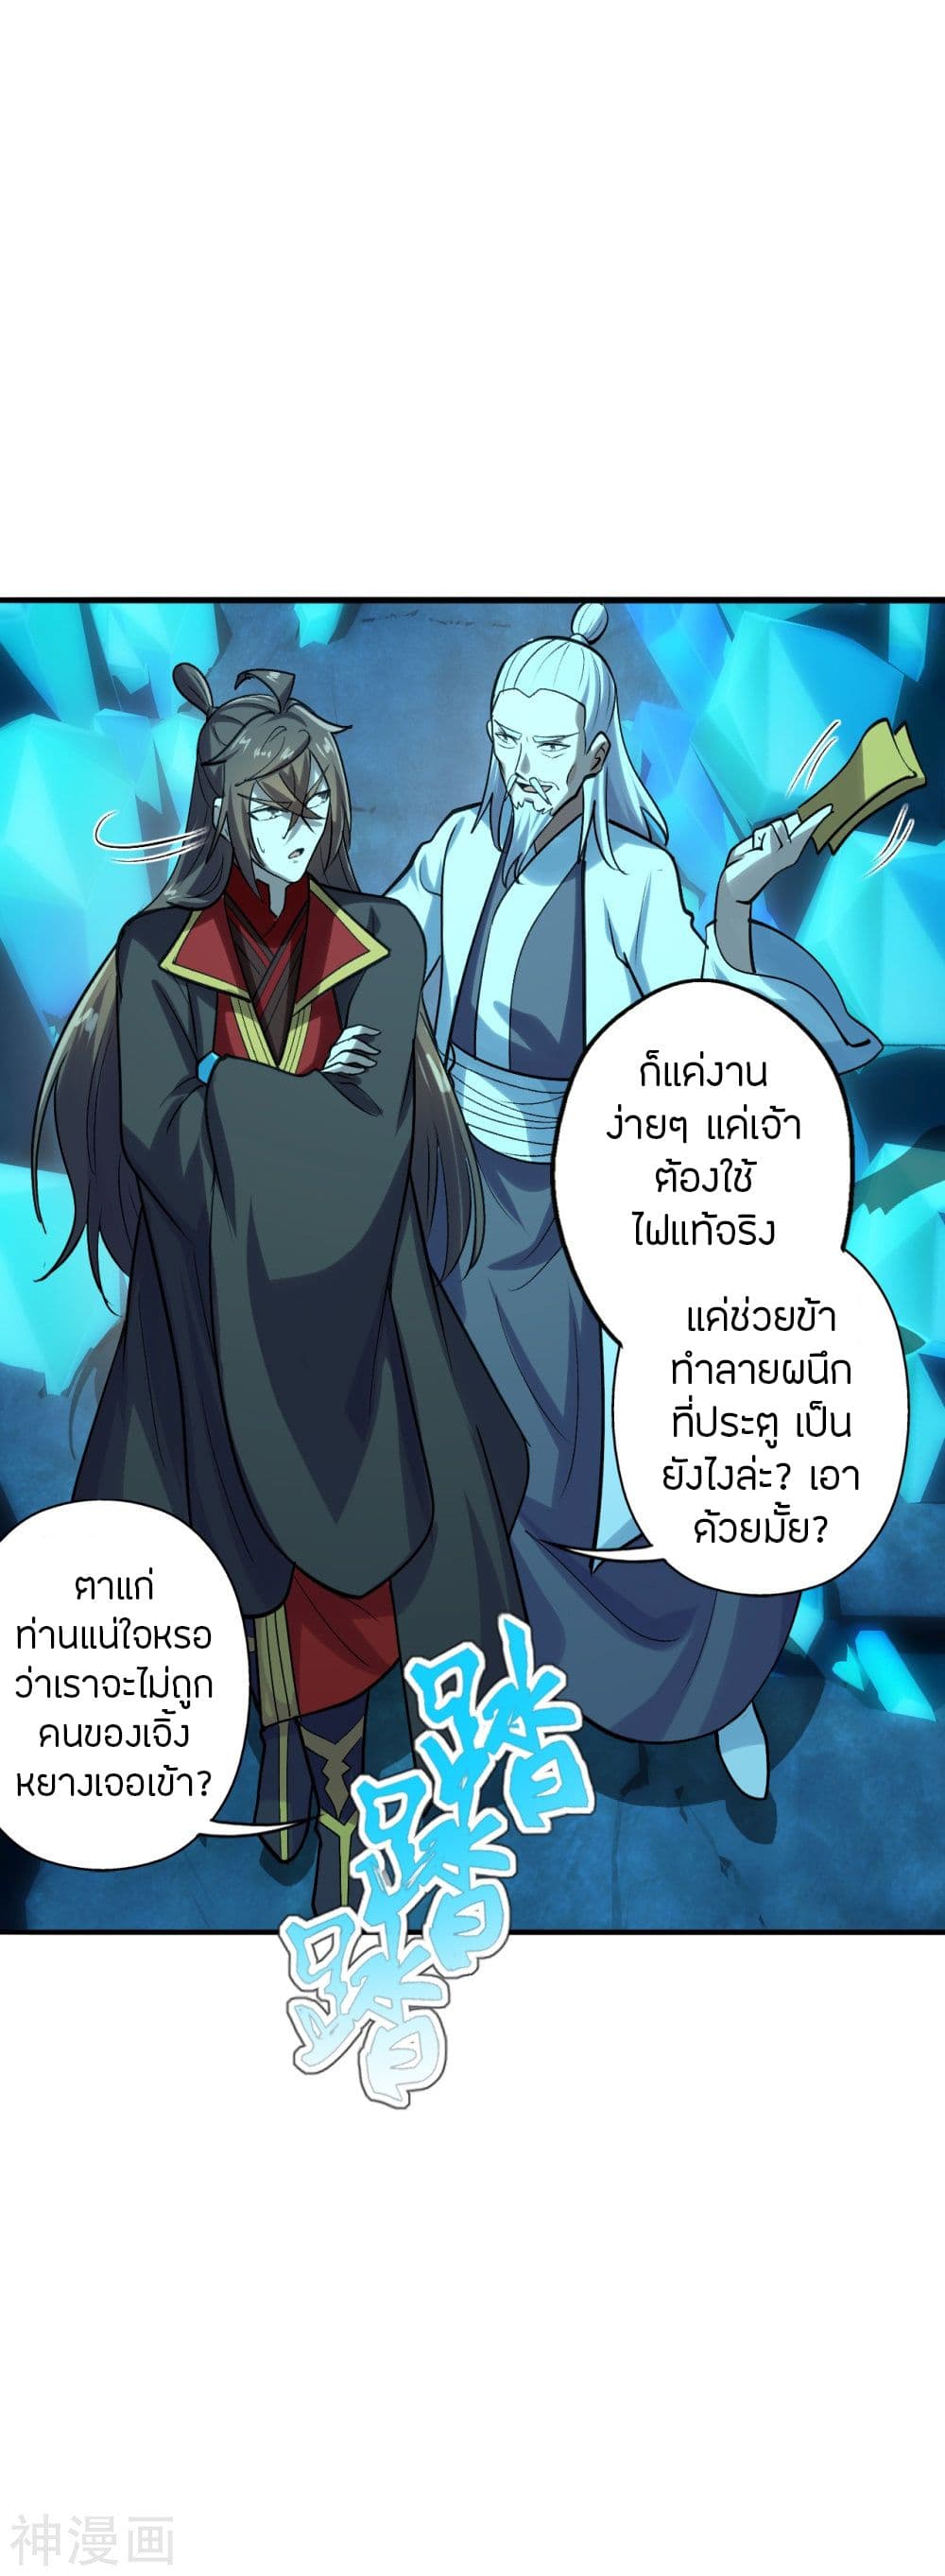 Banished Disciple's Counterattack เธเธฑเธเธฃเธเธฃเธฃเธ”เธดเน€เธเธตเธขเธเธขเธธเธ—เธ 239 (26)